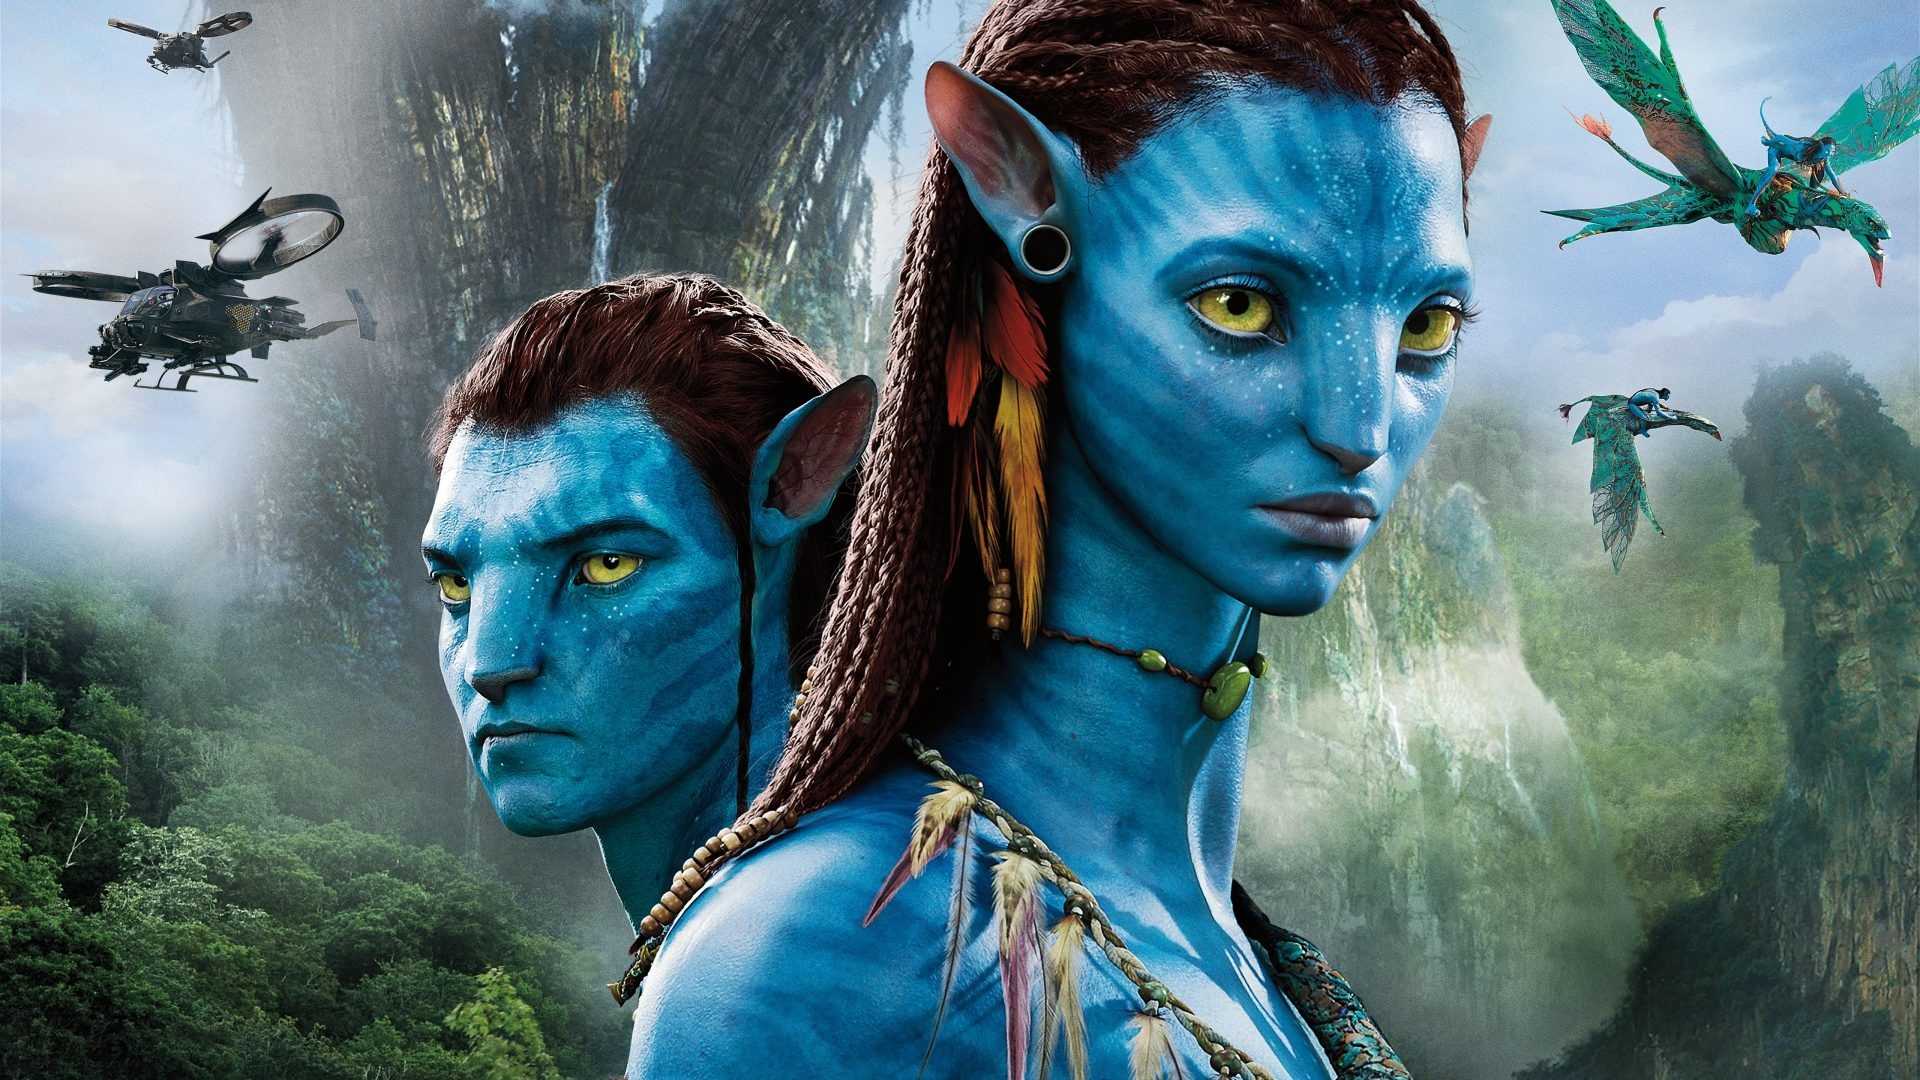 Avatar: The Way of Water director James Cameron opens up about the sequel's box office predictions